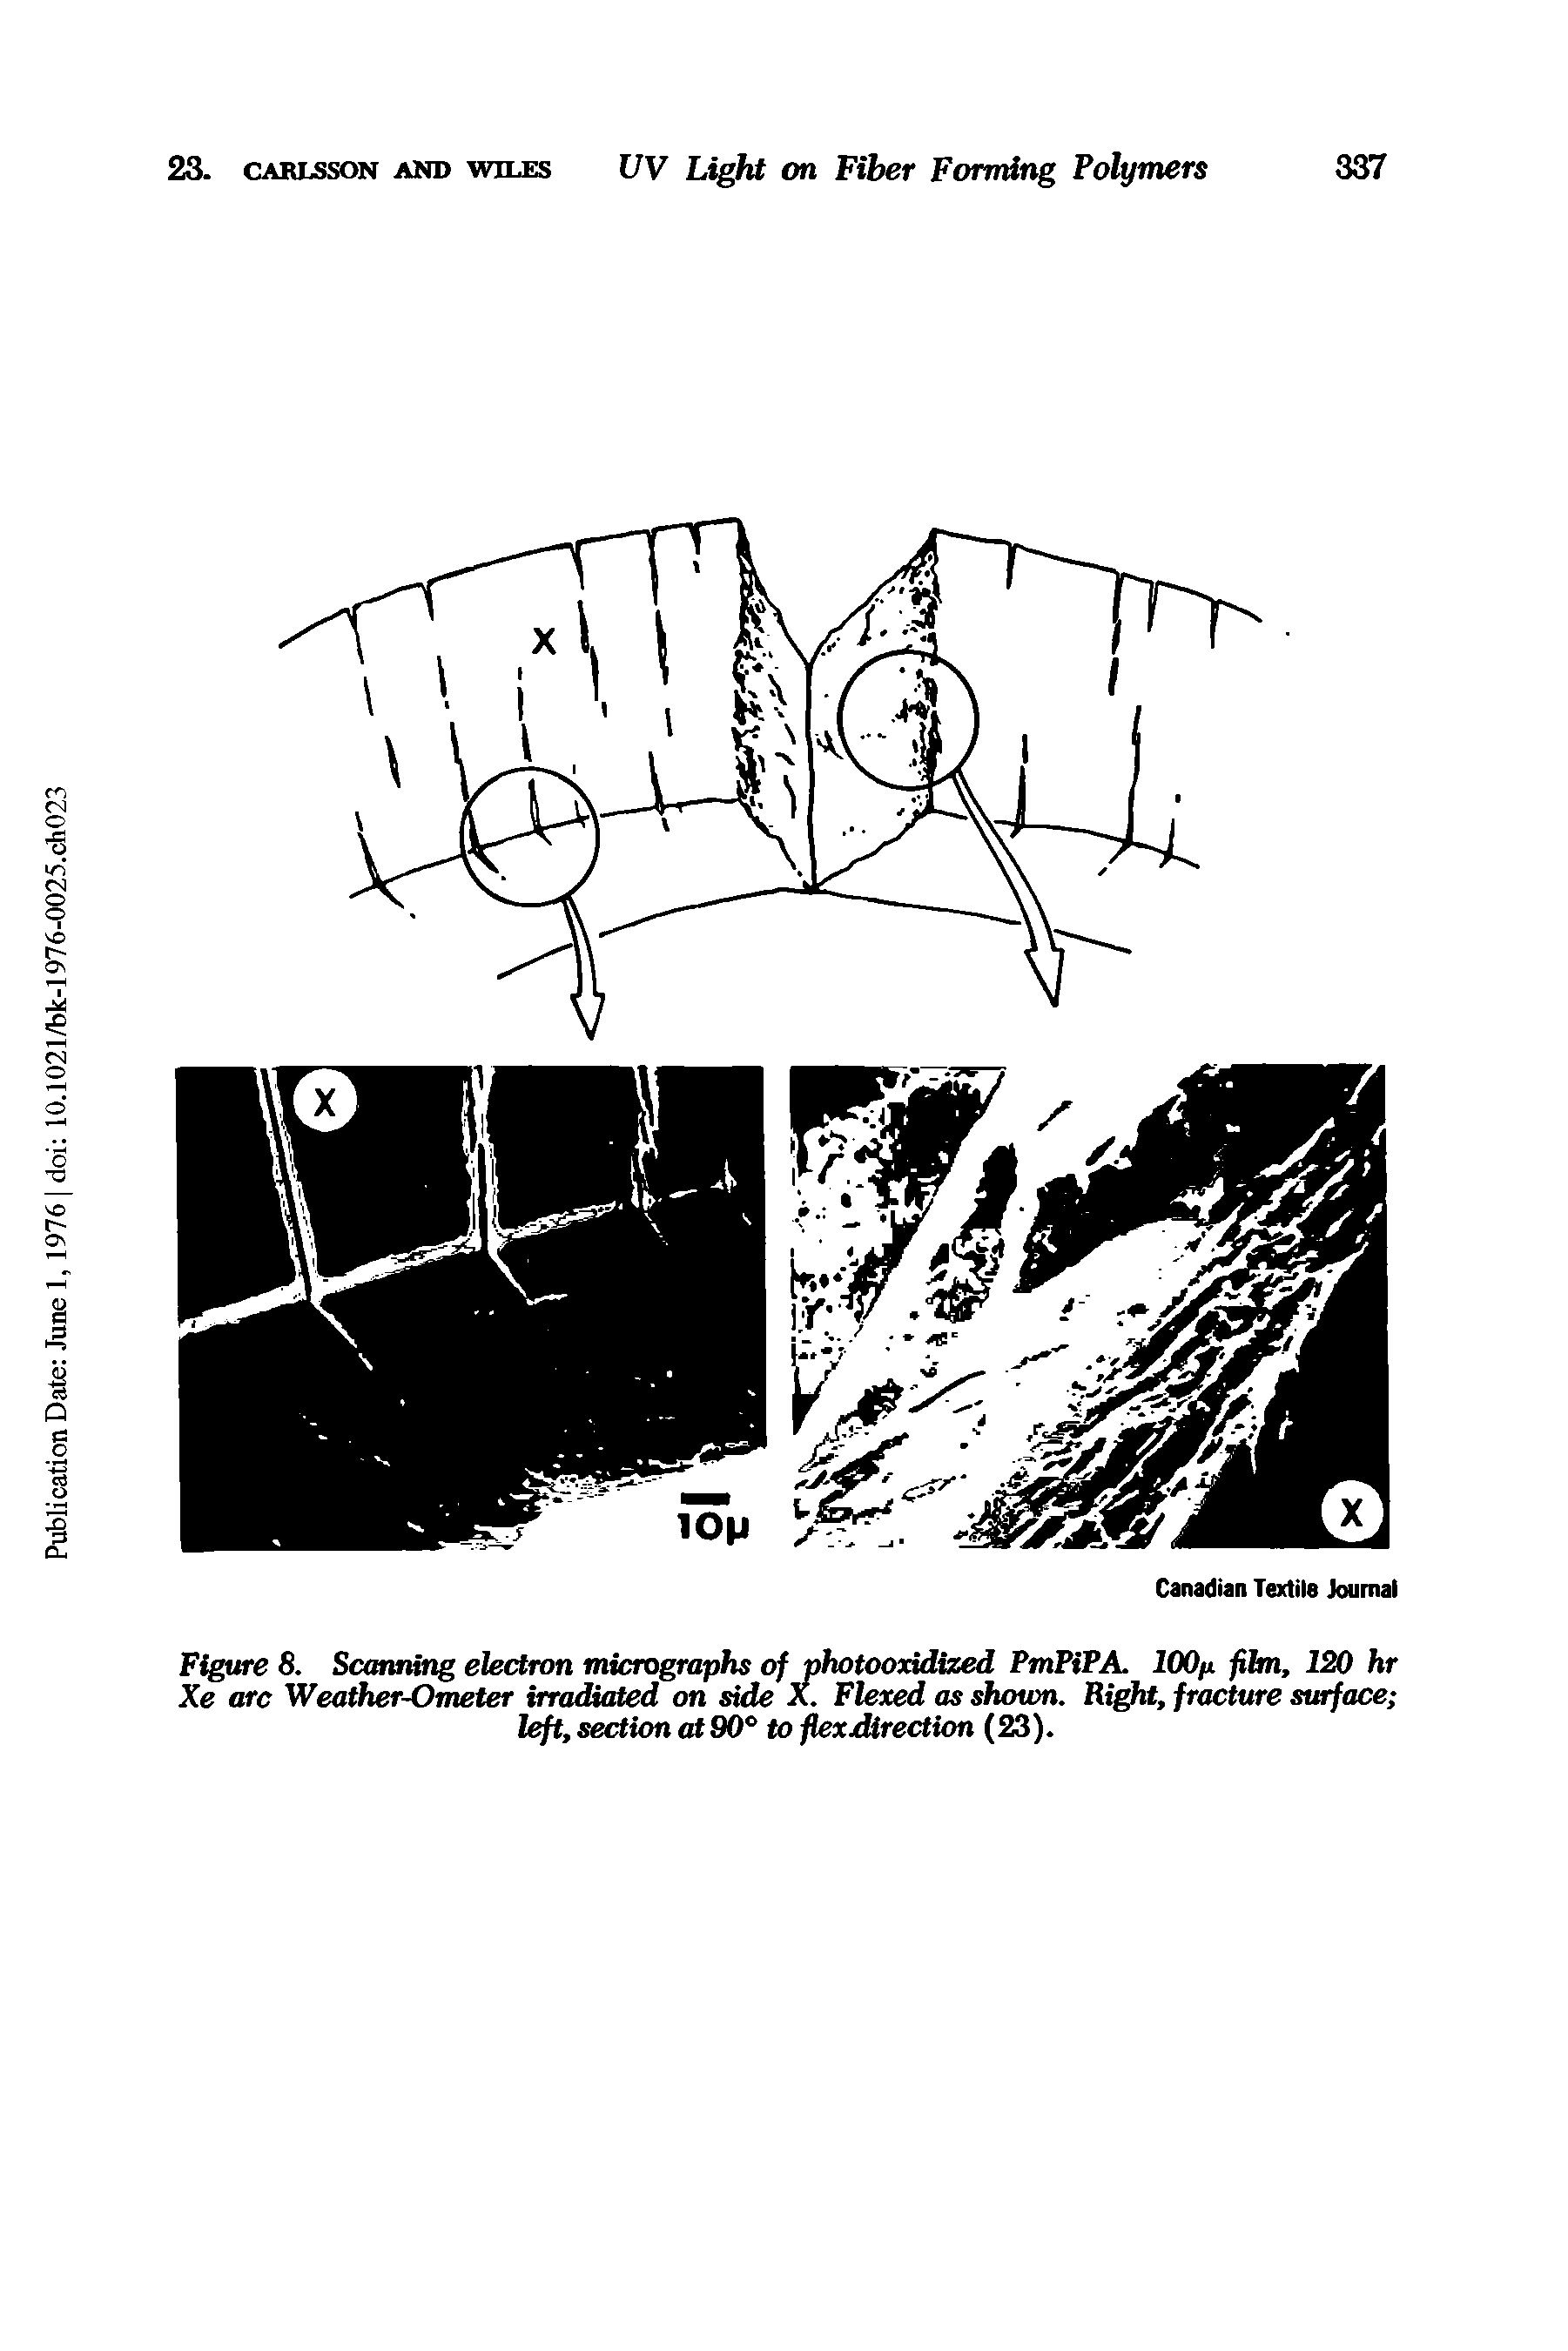 Figure 8. Scanning electron micrographs of photoondized PmPiPA. lOOn film, 120 hr Xe arc Weather-Ometer irradiated on side X. Flexed as shown. Ri t, fracture surface left, section U 90° to fkxjdirectUm (23).